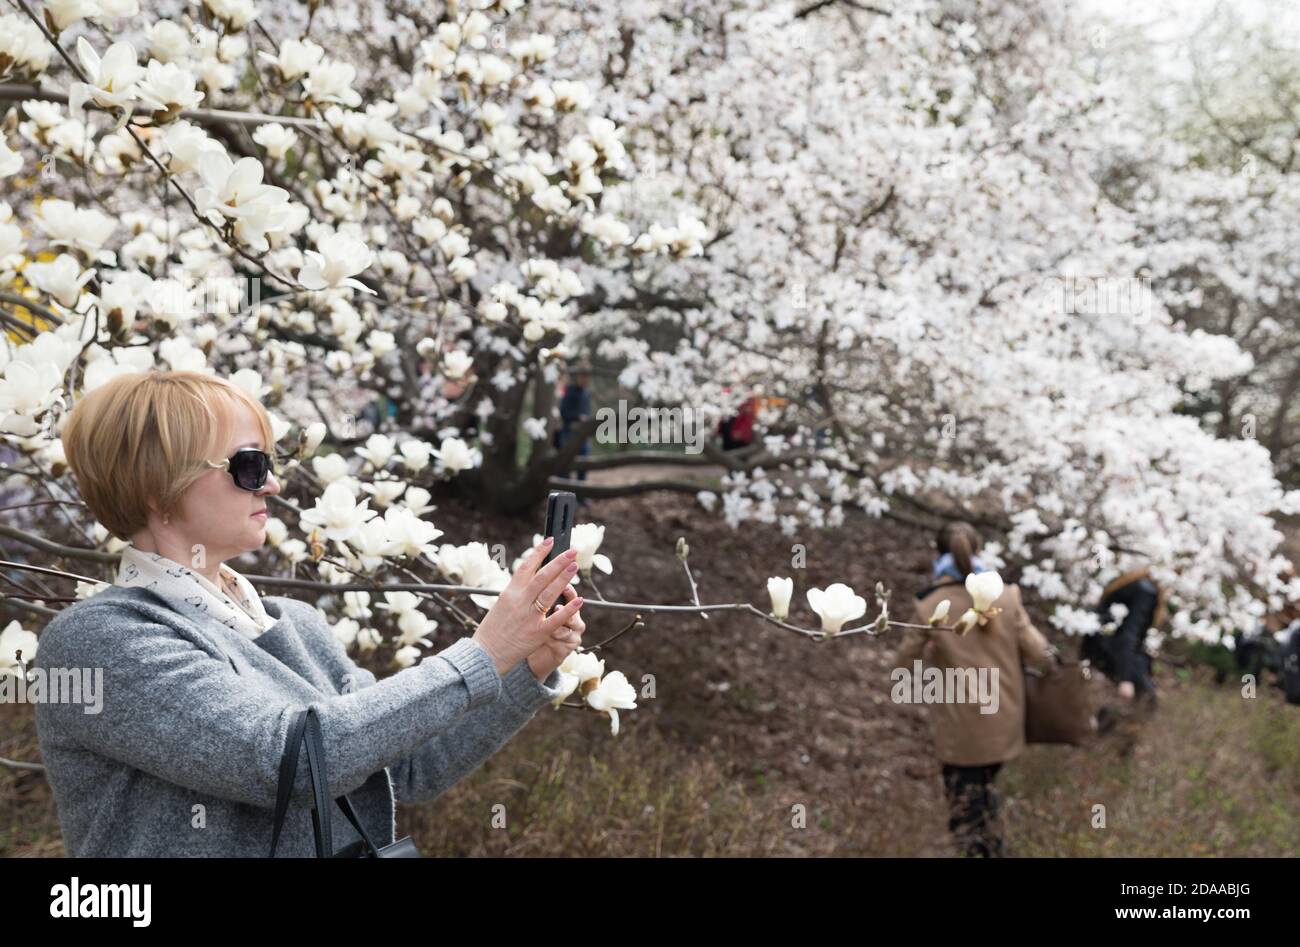 KYIV, UKRAINE - Apr 17, 2018: People enjoy magnolia blossoms. People photograph and making selfies in blossoming magnolia garden. Blossoming magnolia Stock Photo